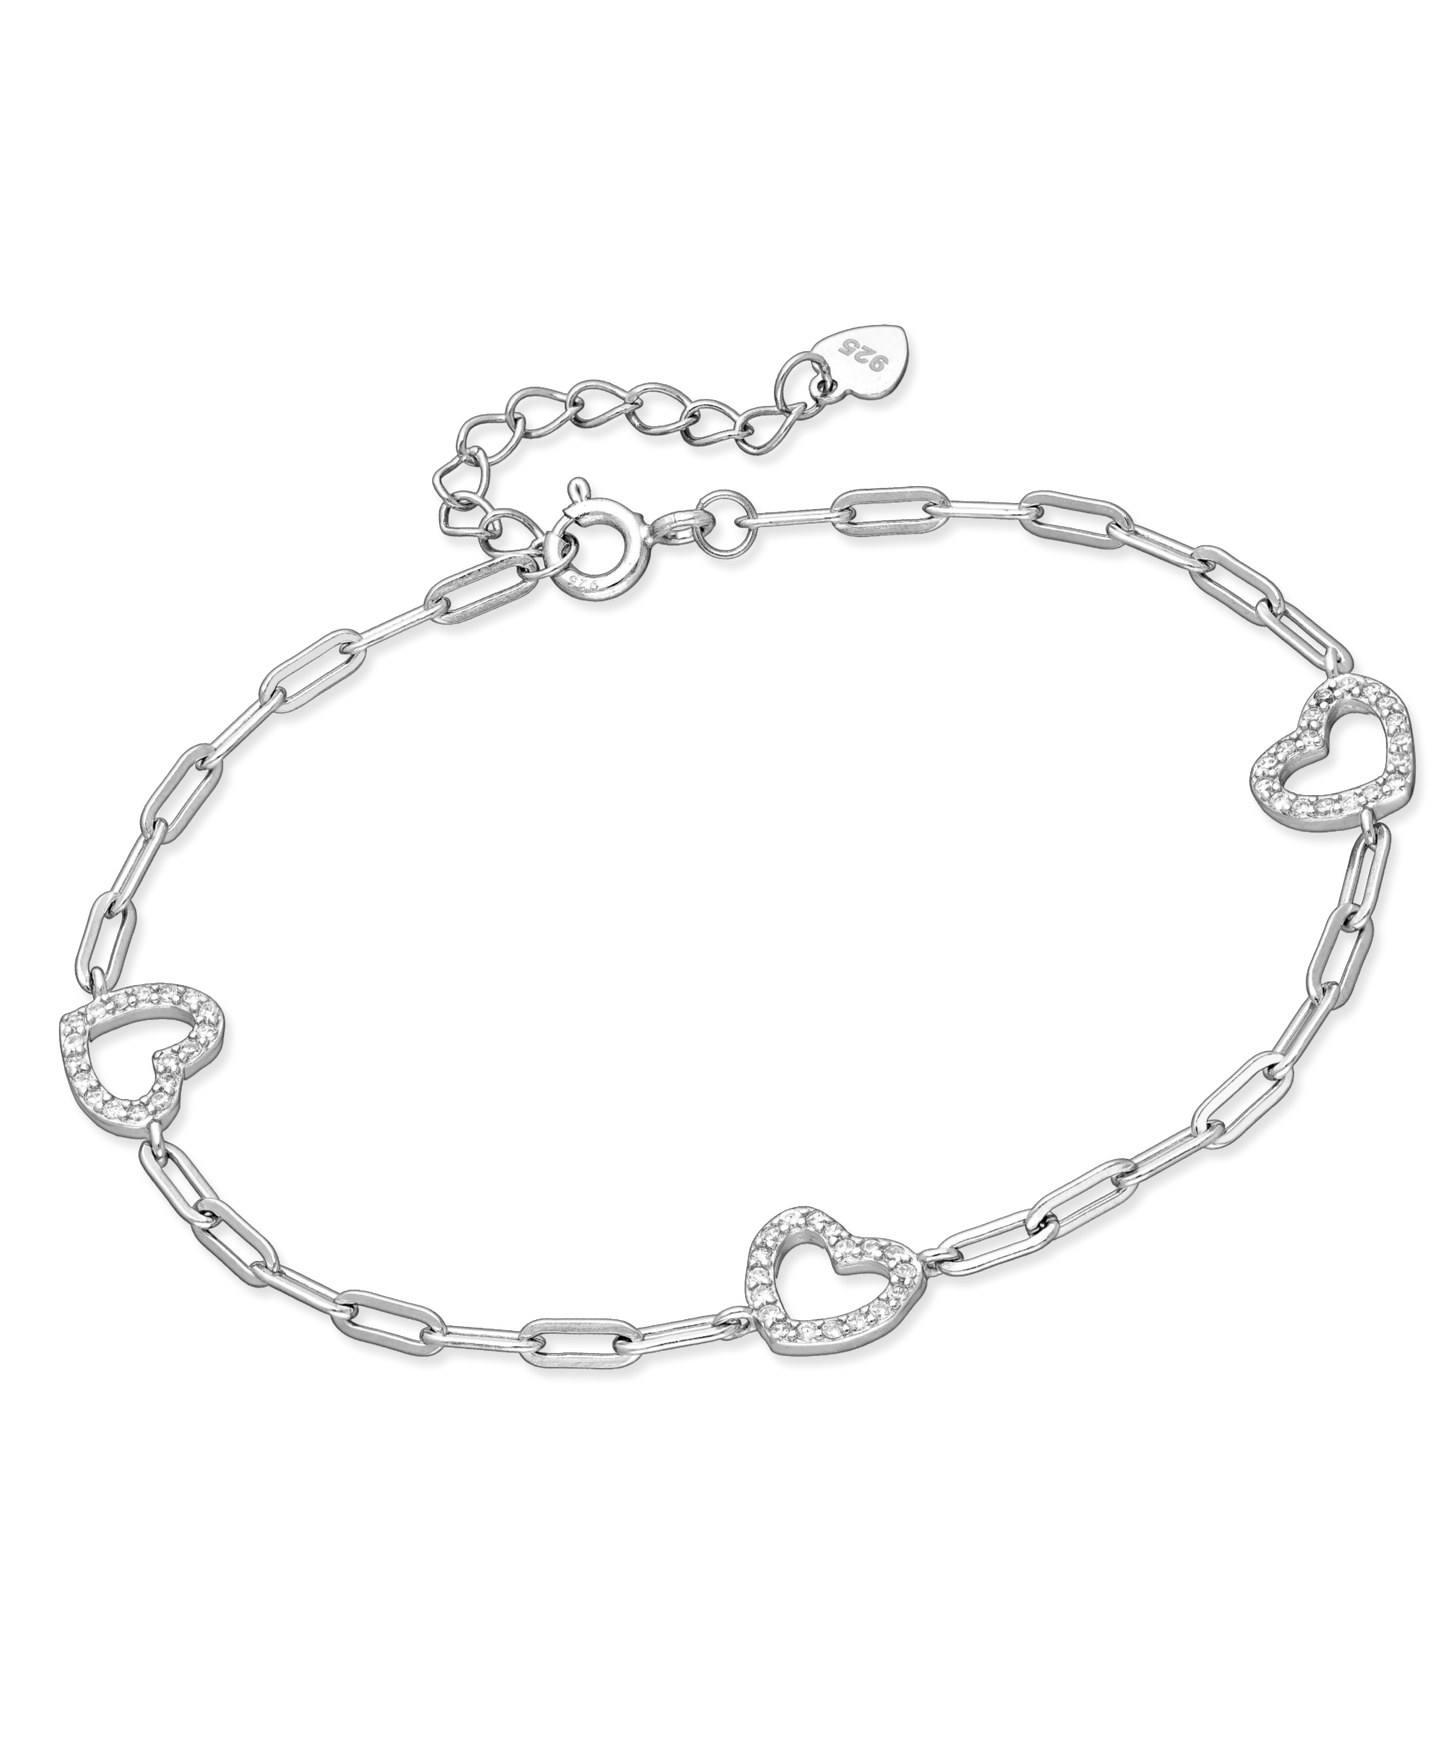 Sterling Silver Heart and Chain Link Bracelet with CZ Simulated Diamonds